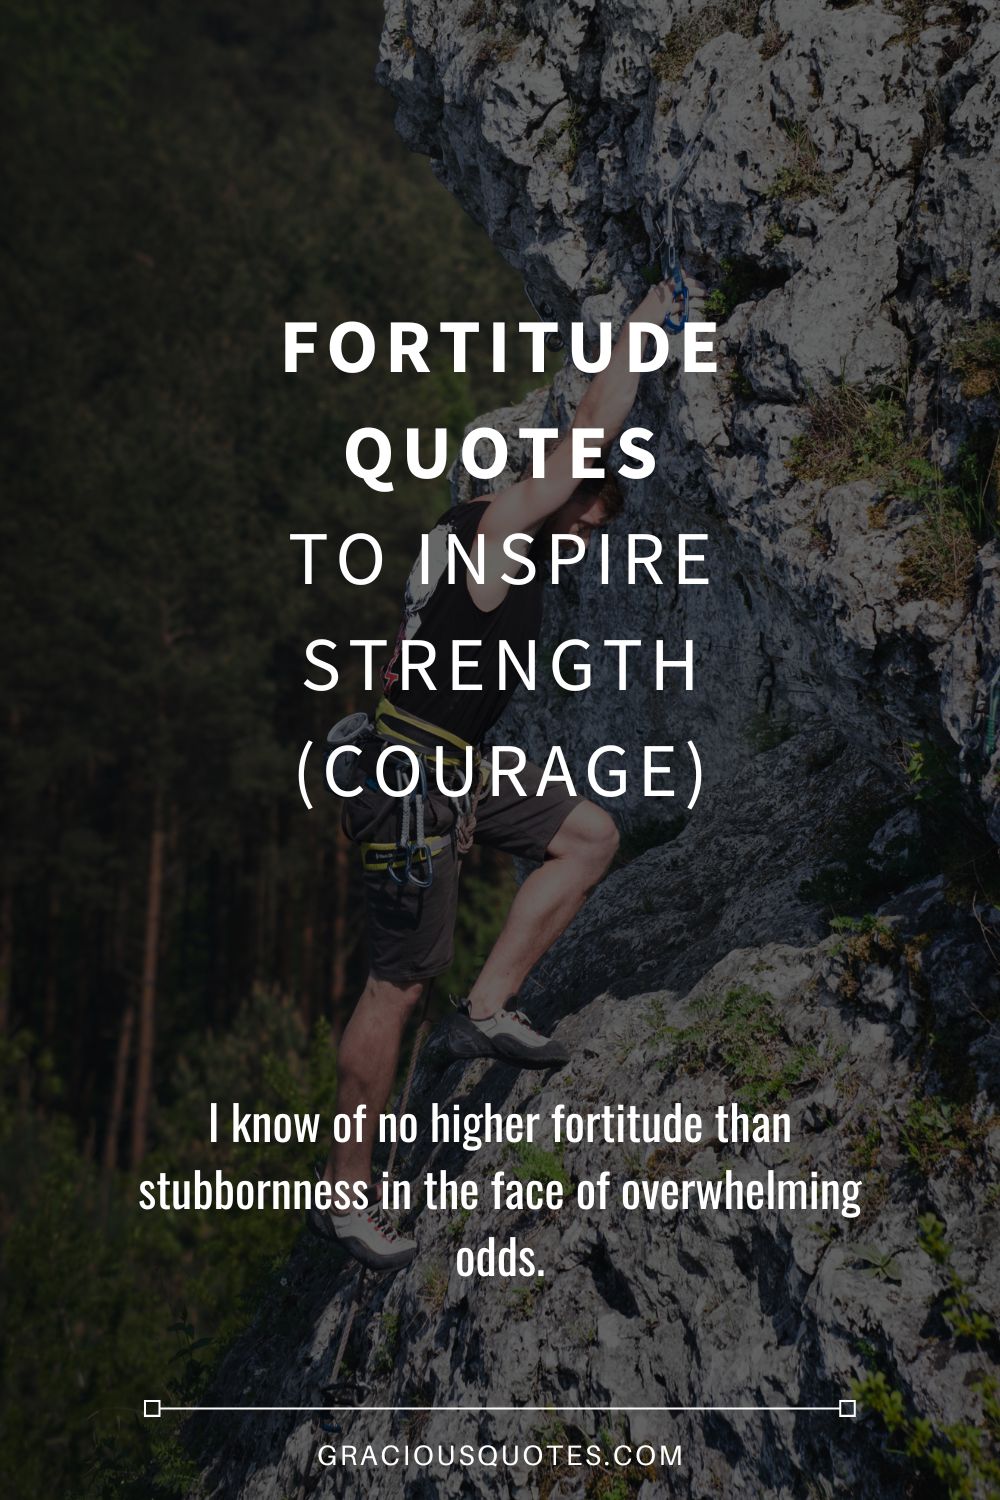 Fortitude Quotes to Inspire Strength (COURAGE) - Gracious Quotes